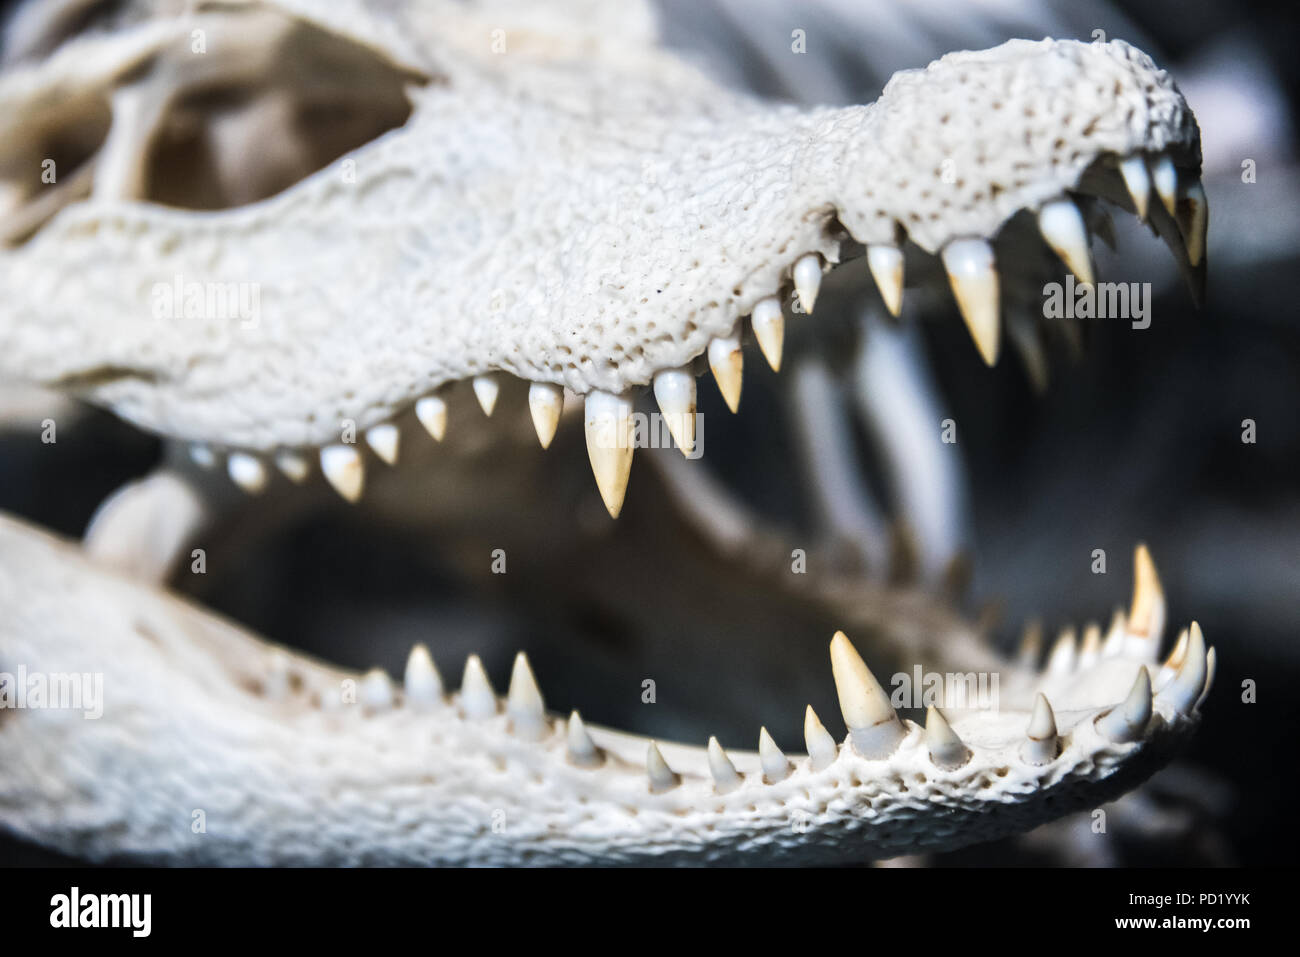 Alligator skull with teeth on display at St. Augustine Alligator Farm Zoological Park in St. Augustine, Florida. (USA) Stock Photo